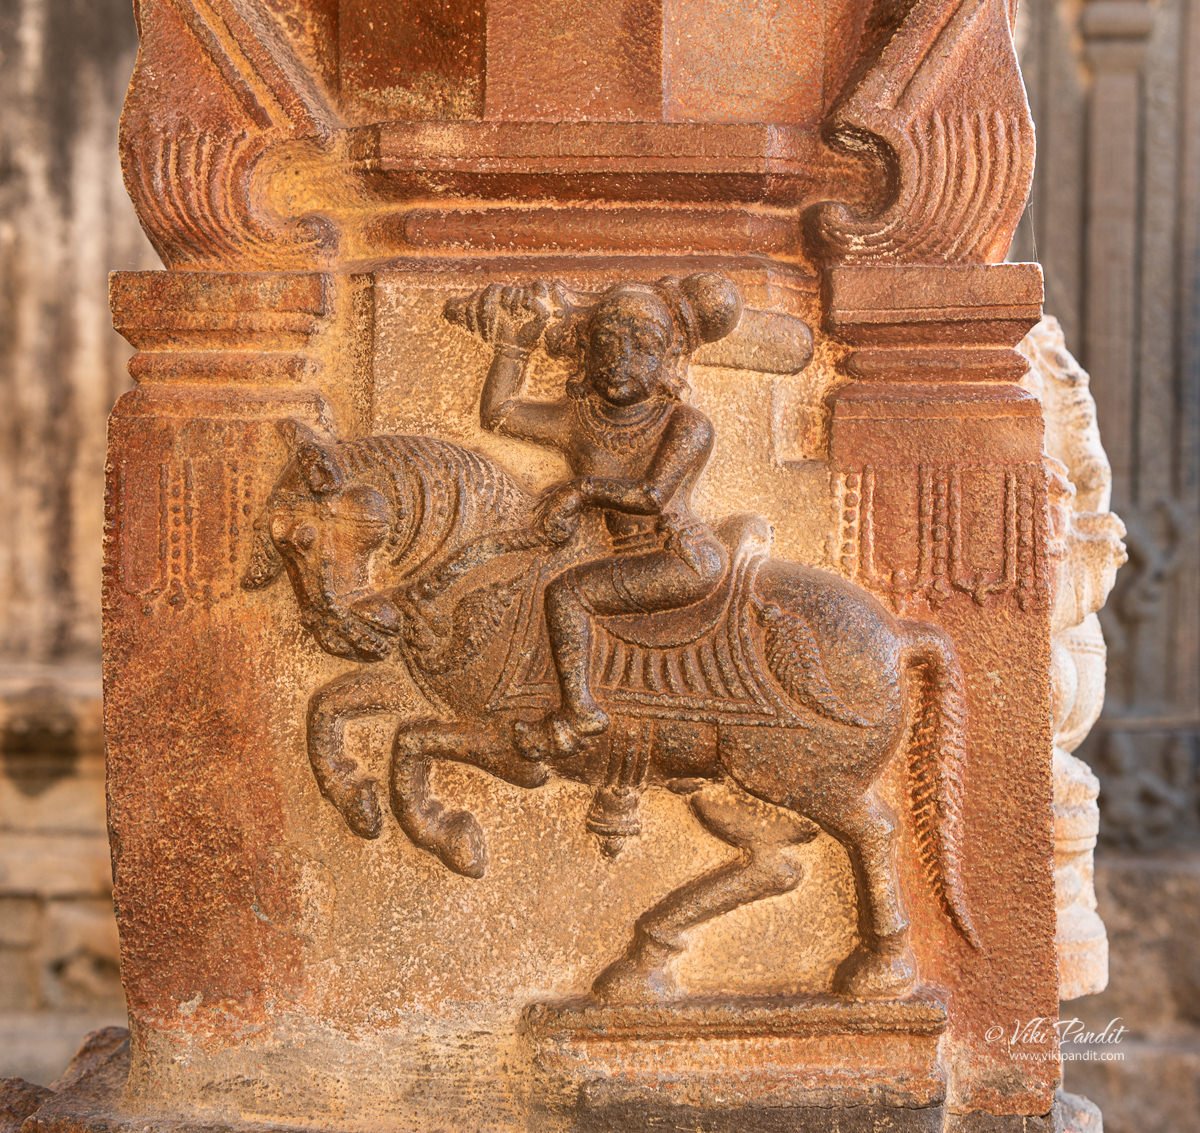 Carving of a warrior on the pillars leading to the Ramlingeshwara Temple